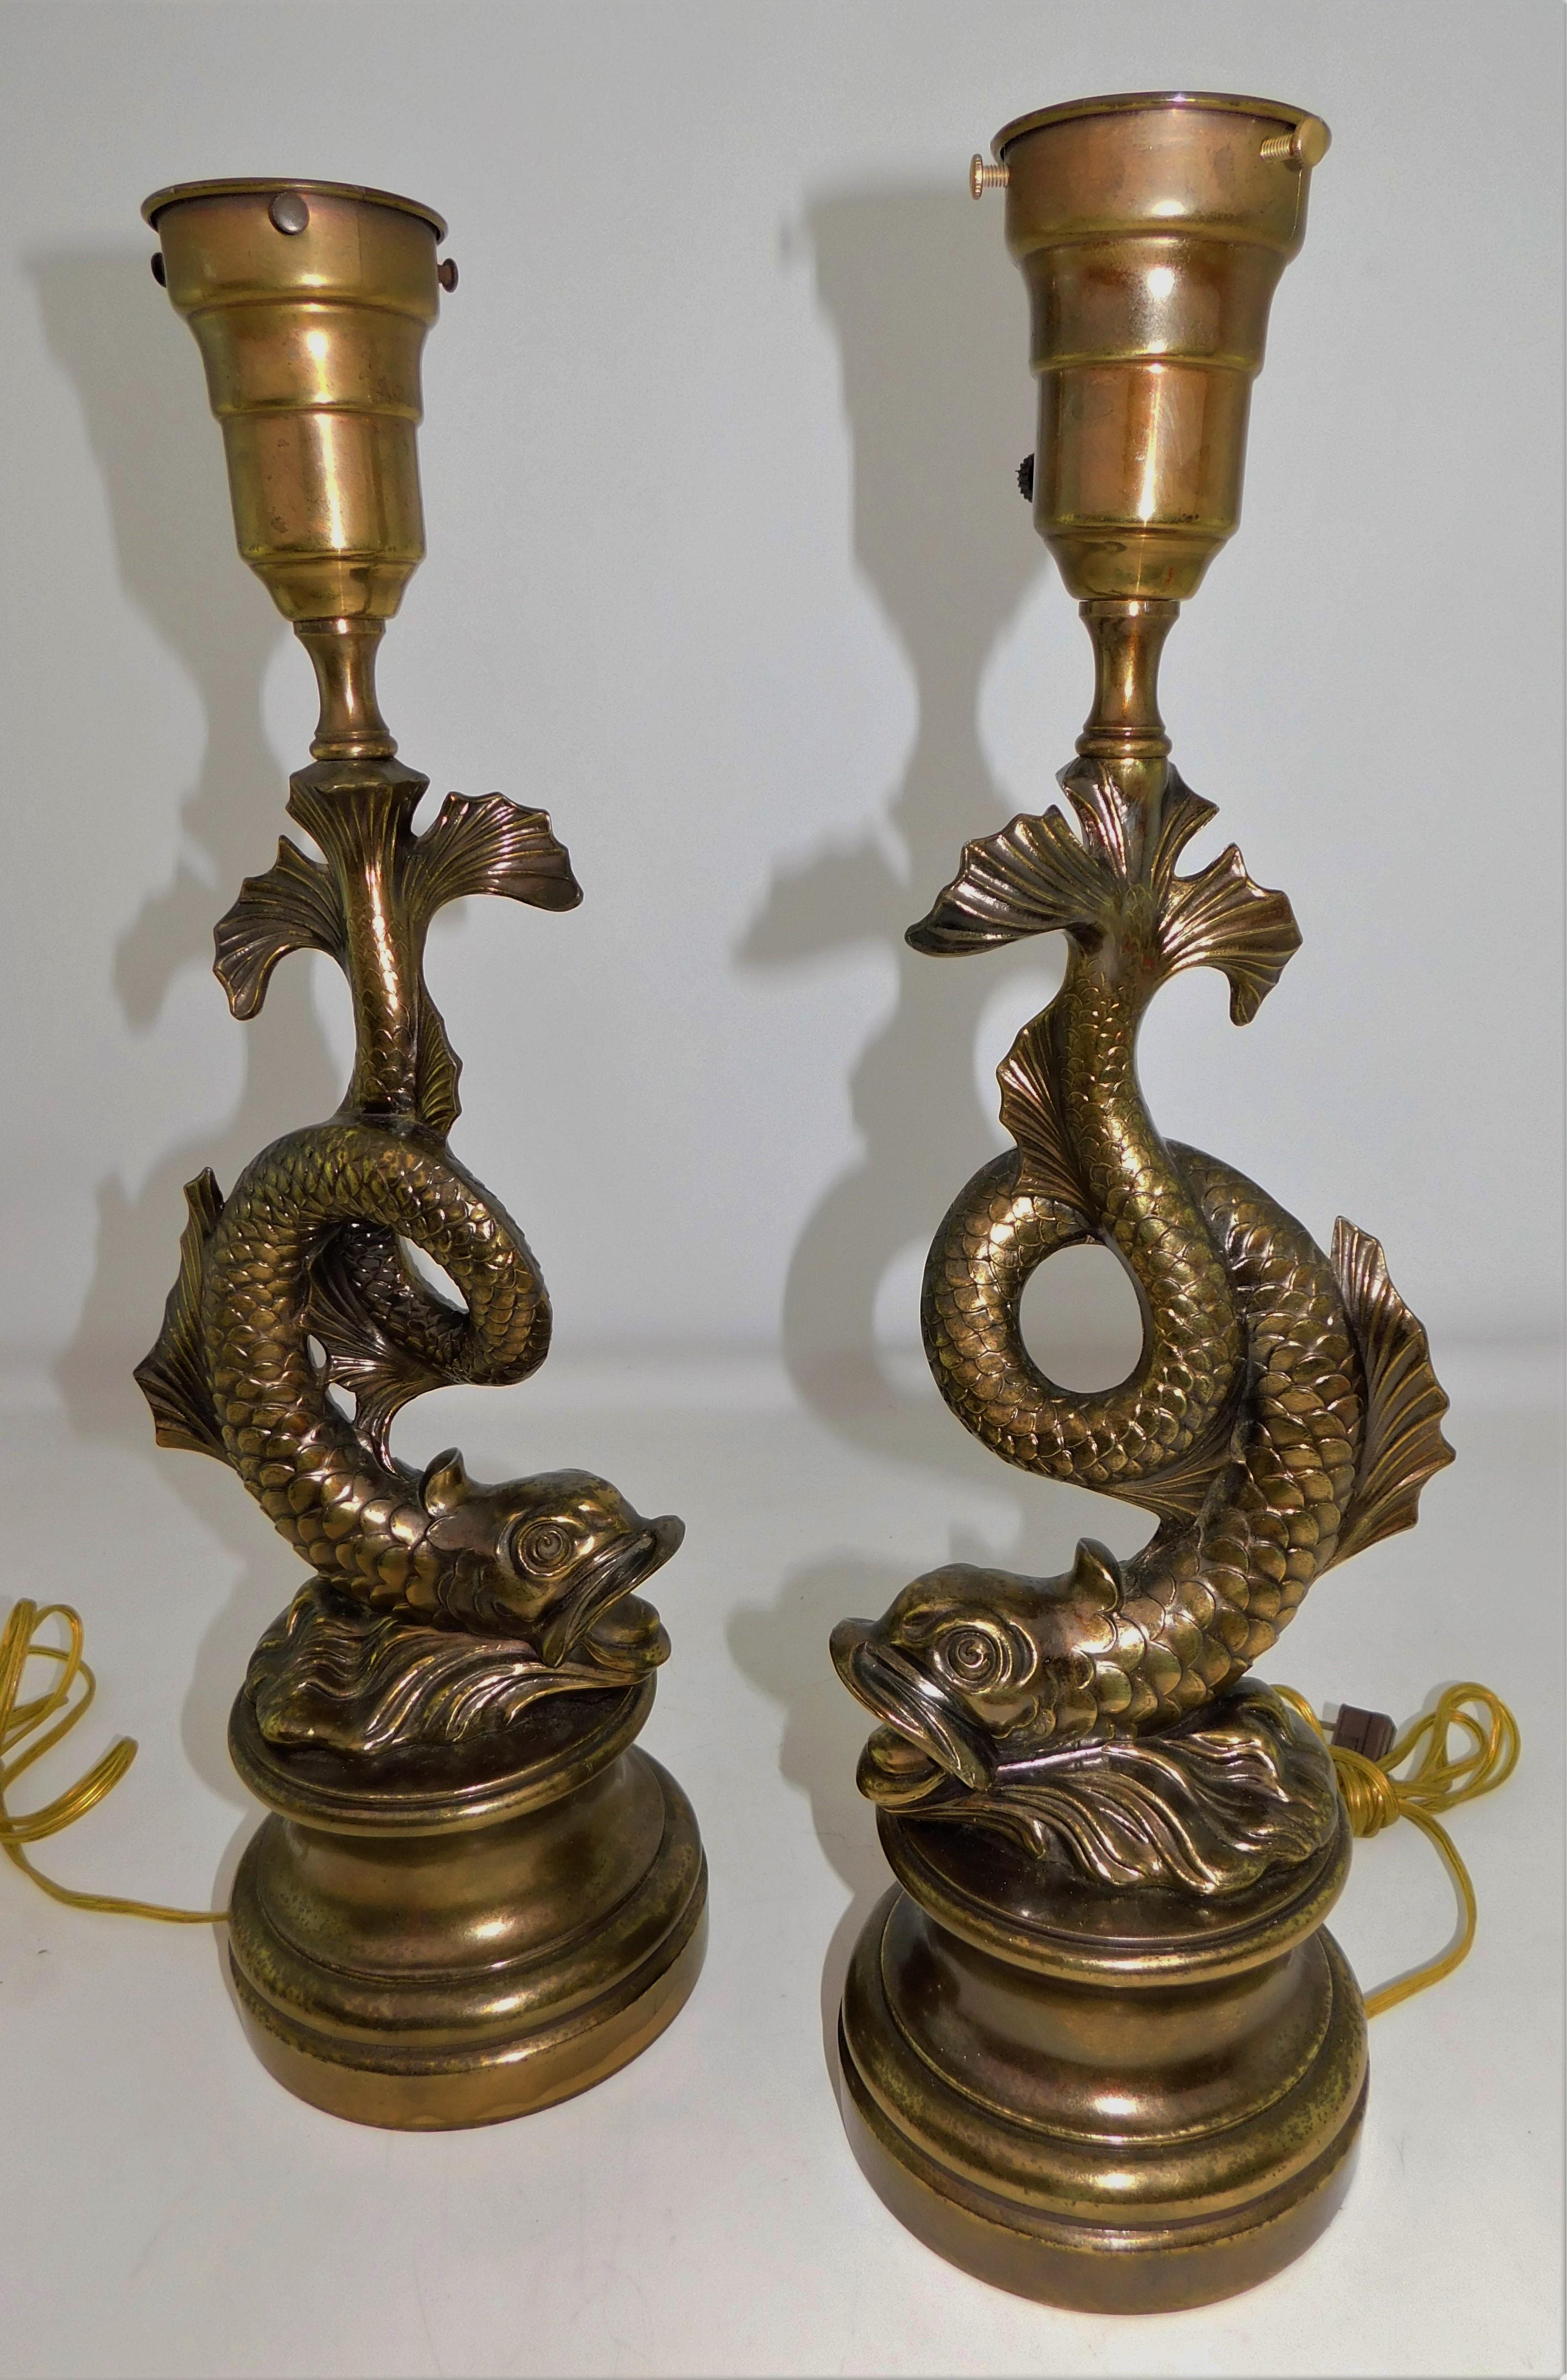 Pair of 1950s Stylized Japanese Design Dragon Serpentine Koi Fish Table Lamps In Good Condition For Sale In Hamilton, Ontario